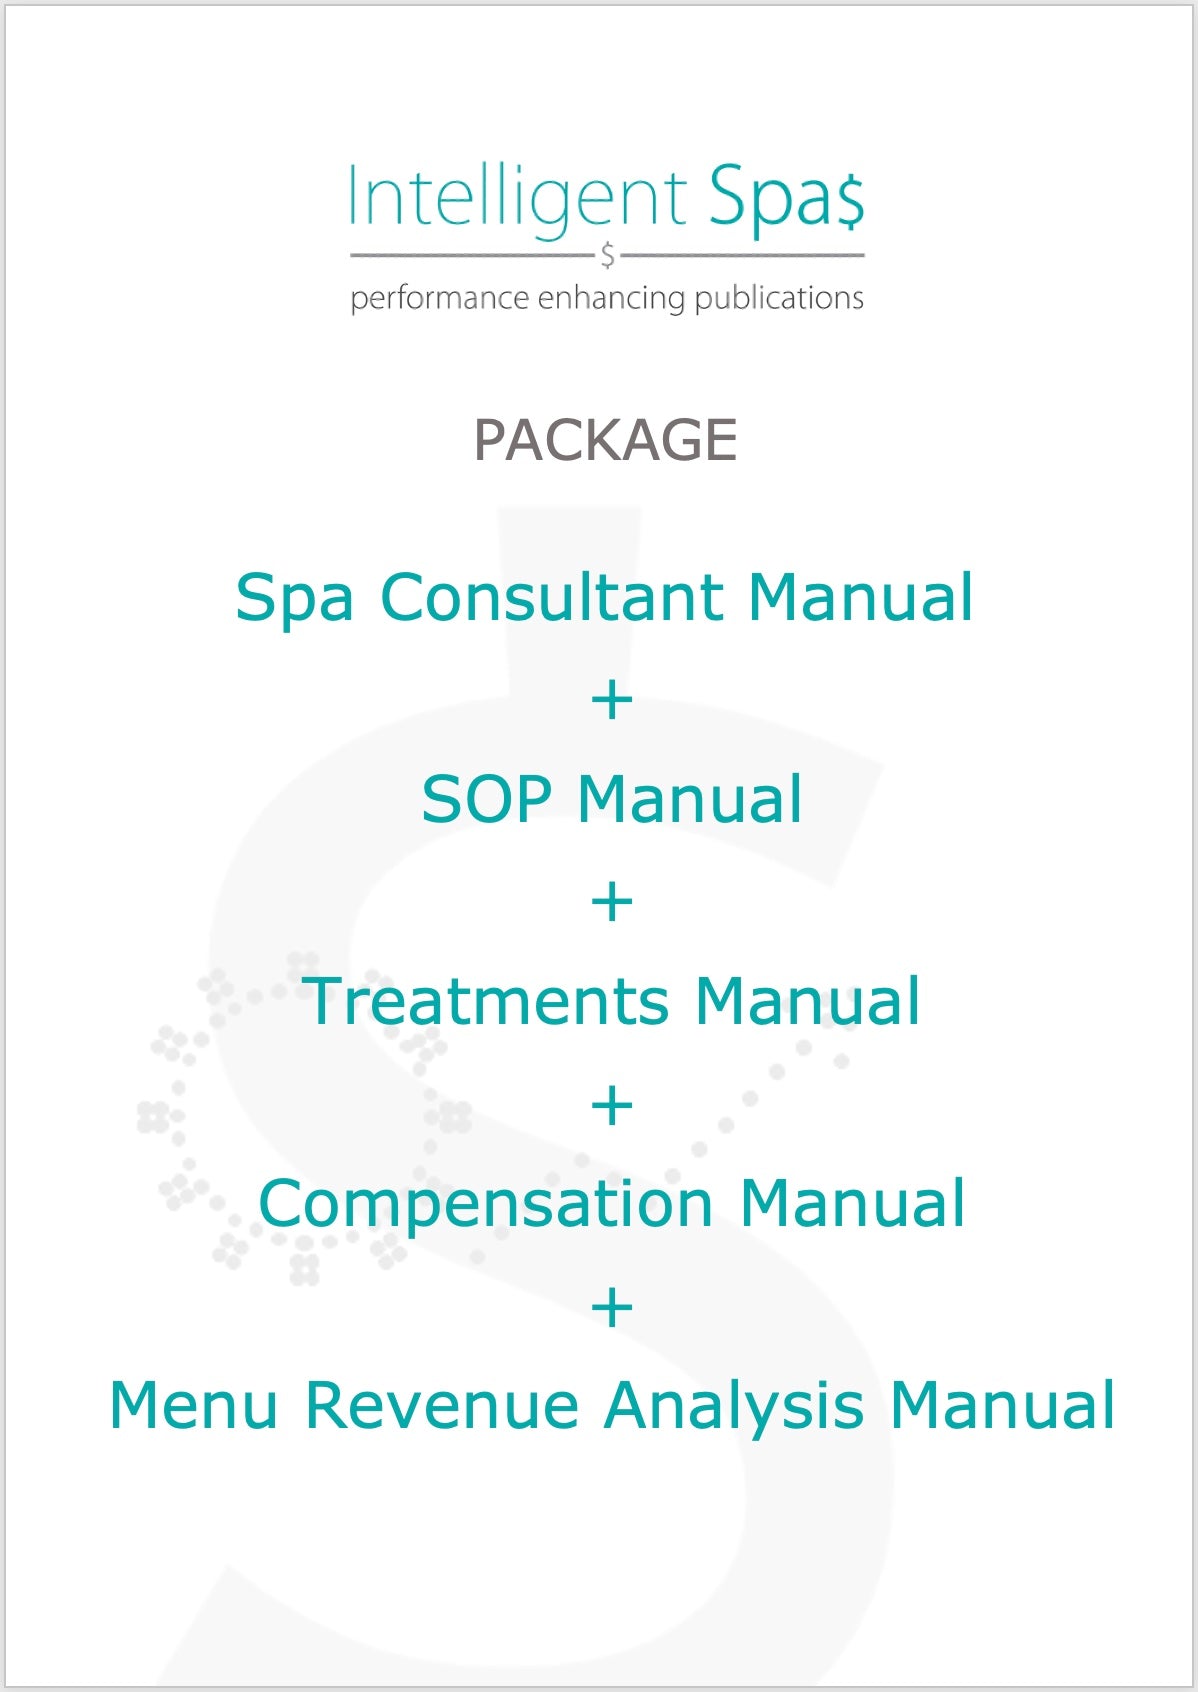 Package Spa Consultant Toolkit Package 5 Manuals Intelligent Spas Pte Ltd